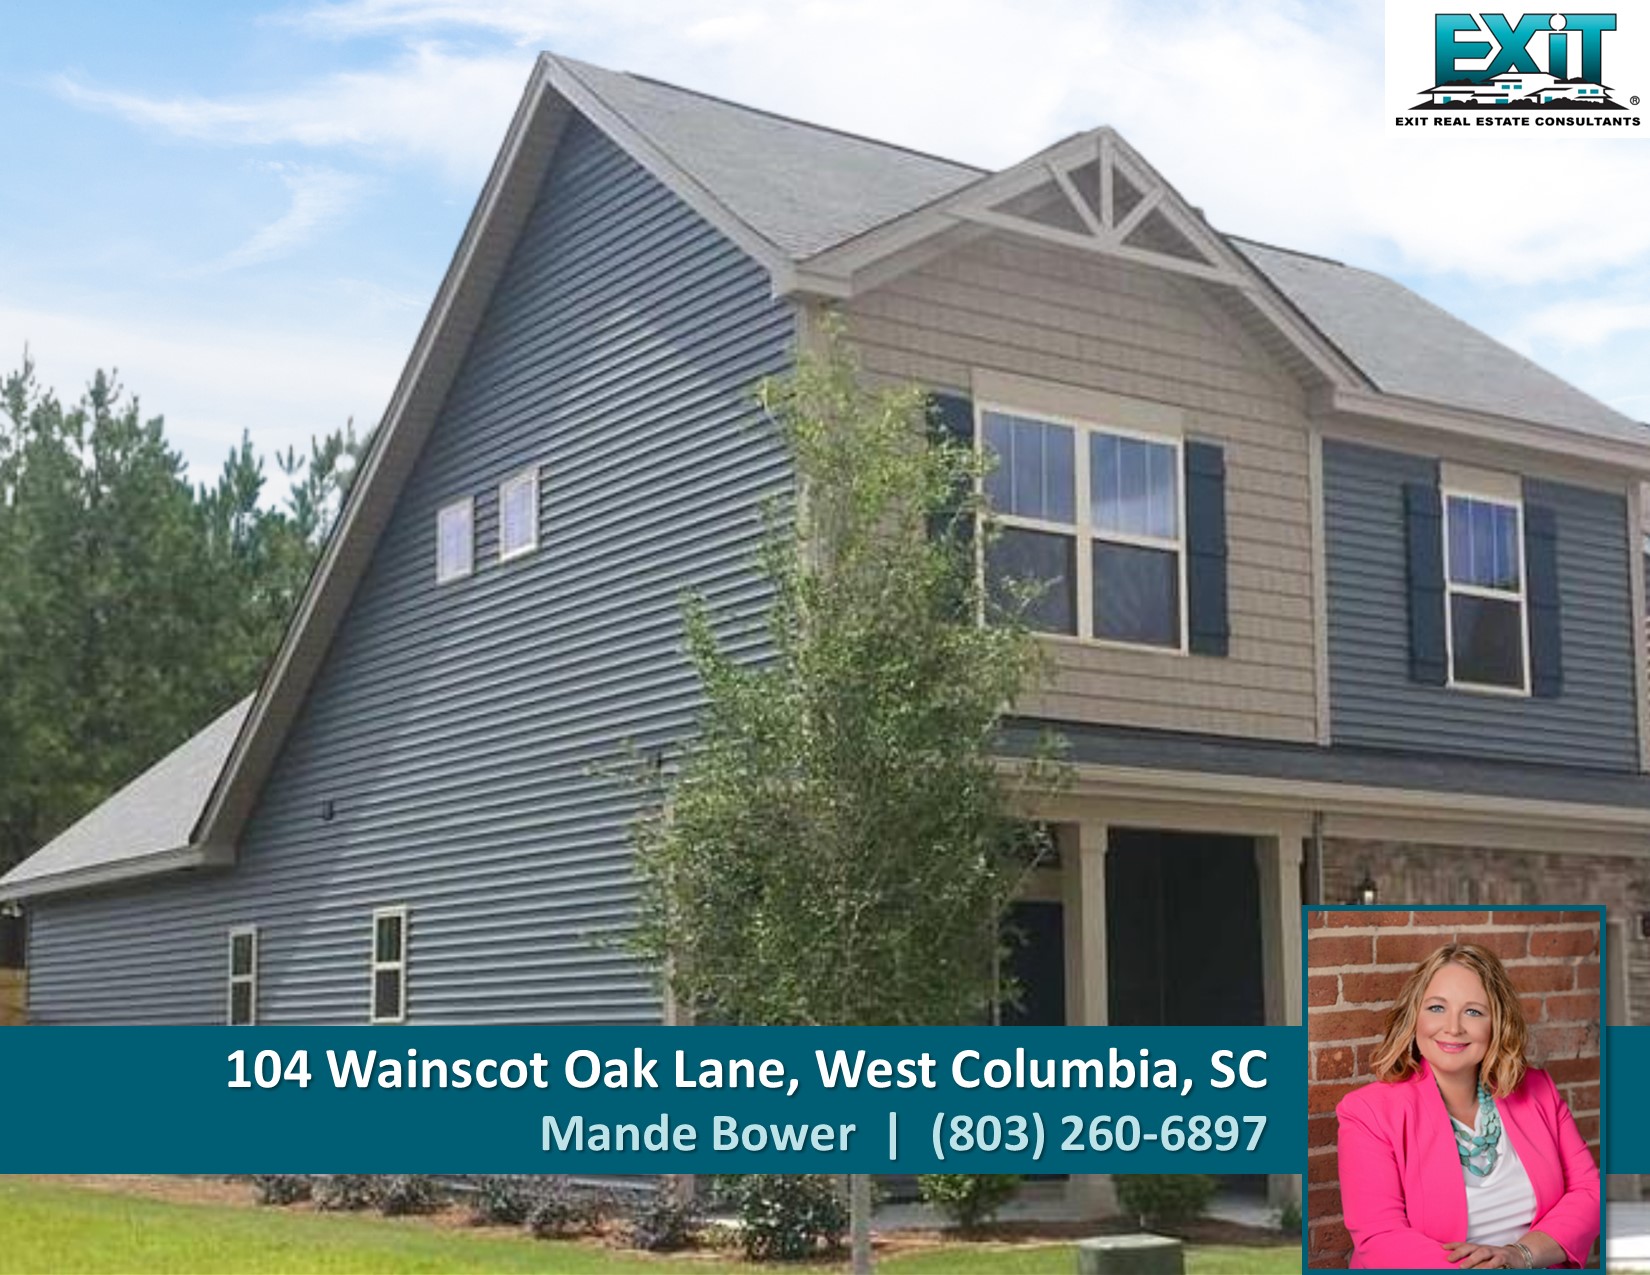 Just listed in Oakwood Village - West Columbia